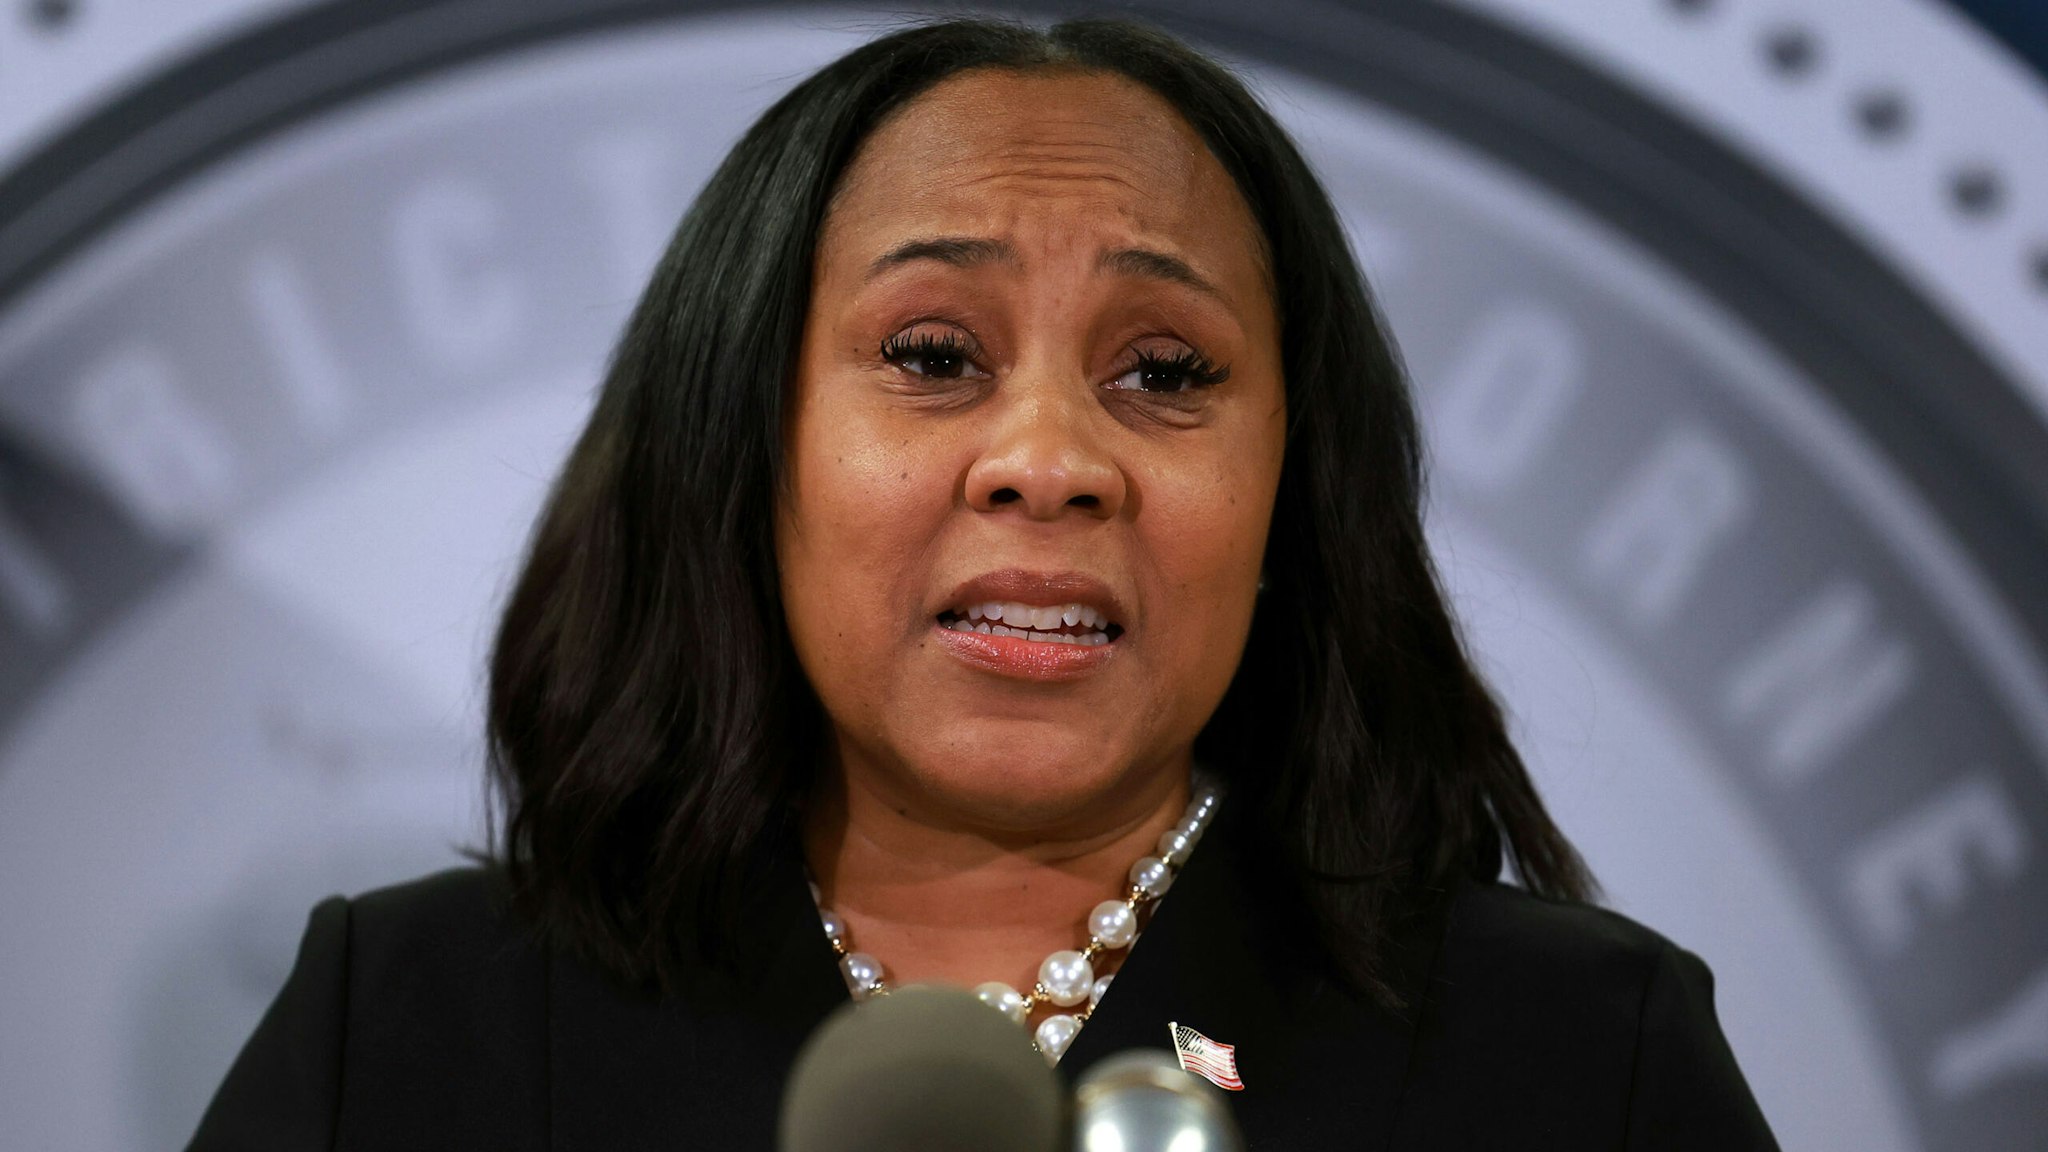 ATLANTA, GEORGIA - AUGUST 14: Fulton County District Attorney Fani Willis speaks during a news conference at the Fulton County Government building on August 14, 2023 in Atlanta, Georgia. A grand jury today handed up an indictment naming former President Donald Trump and his Republican allies over an alleged attempt to overturn the 2020 election results in the state.